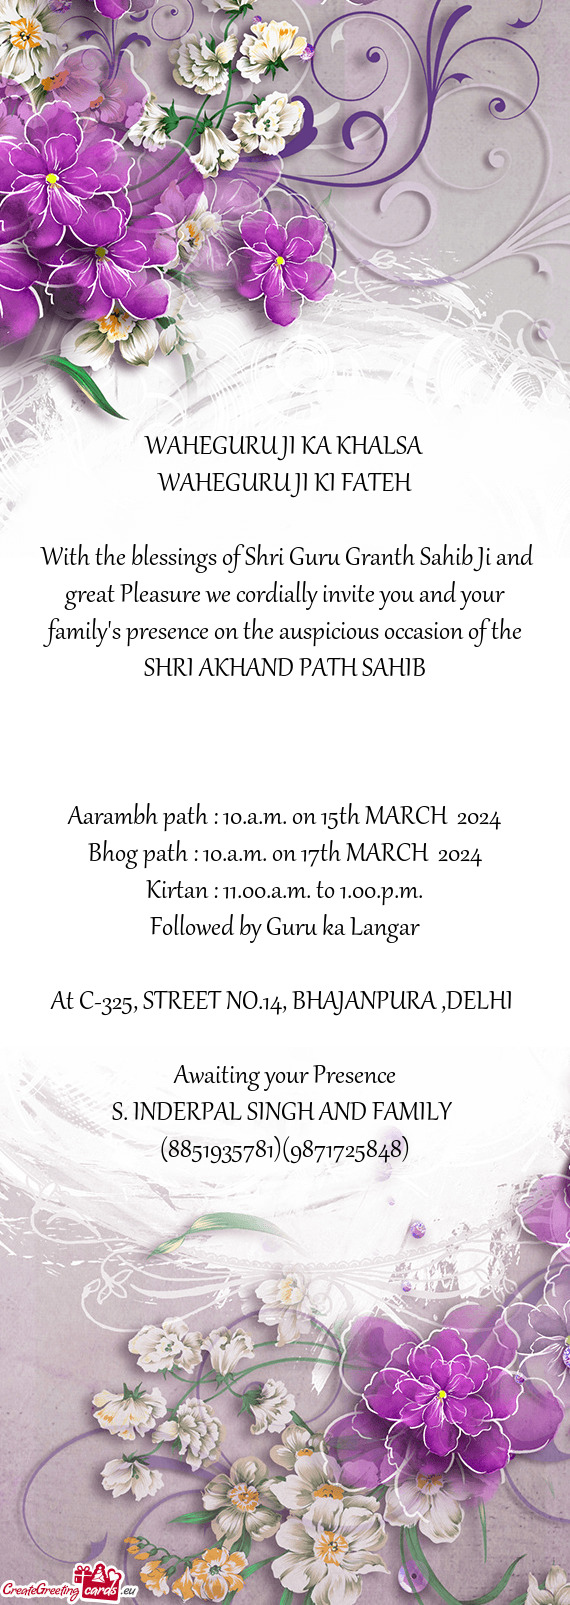 With the blessings of Shri Guru Granth Sahib Ji and great Pleasure we cordially invite you and your